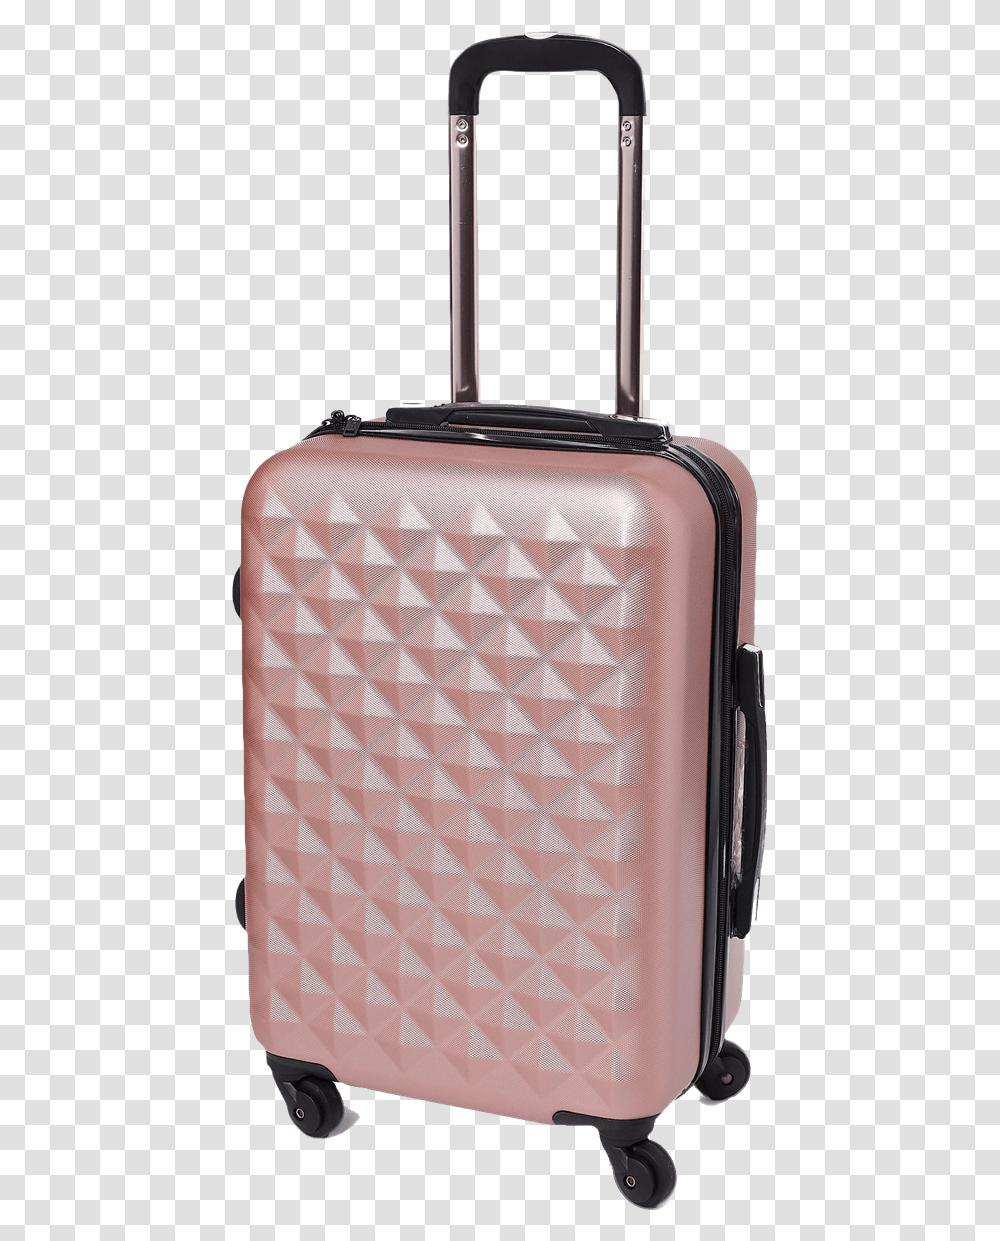 Suitcase Free Download Typo Rose Gold Suitcase, Luggage, Briefcase, Bag, Purse Transparent Png